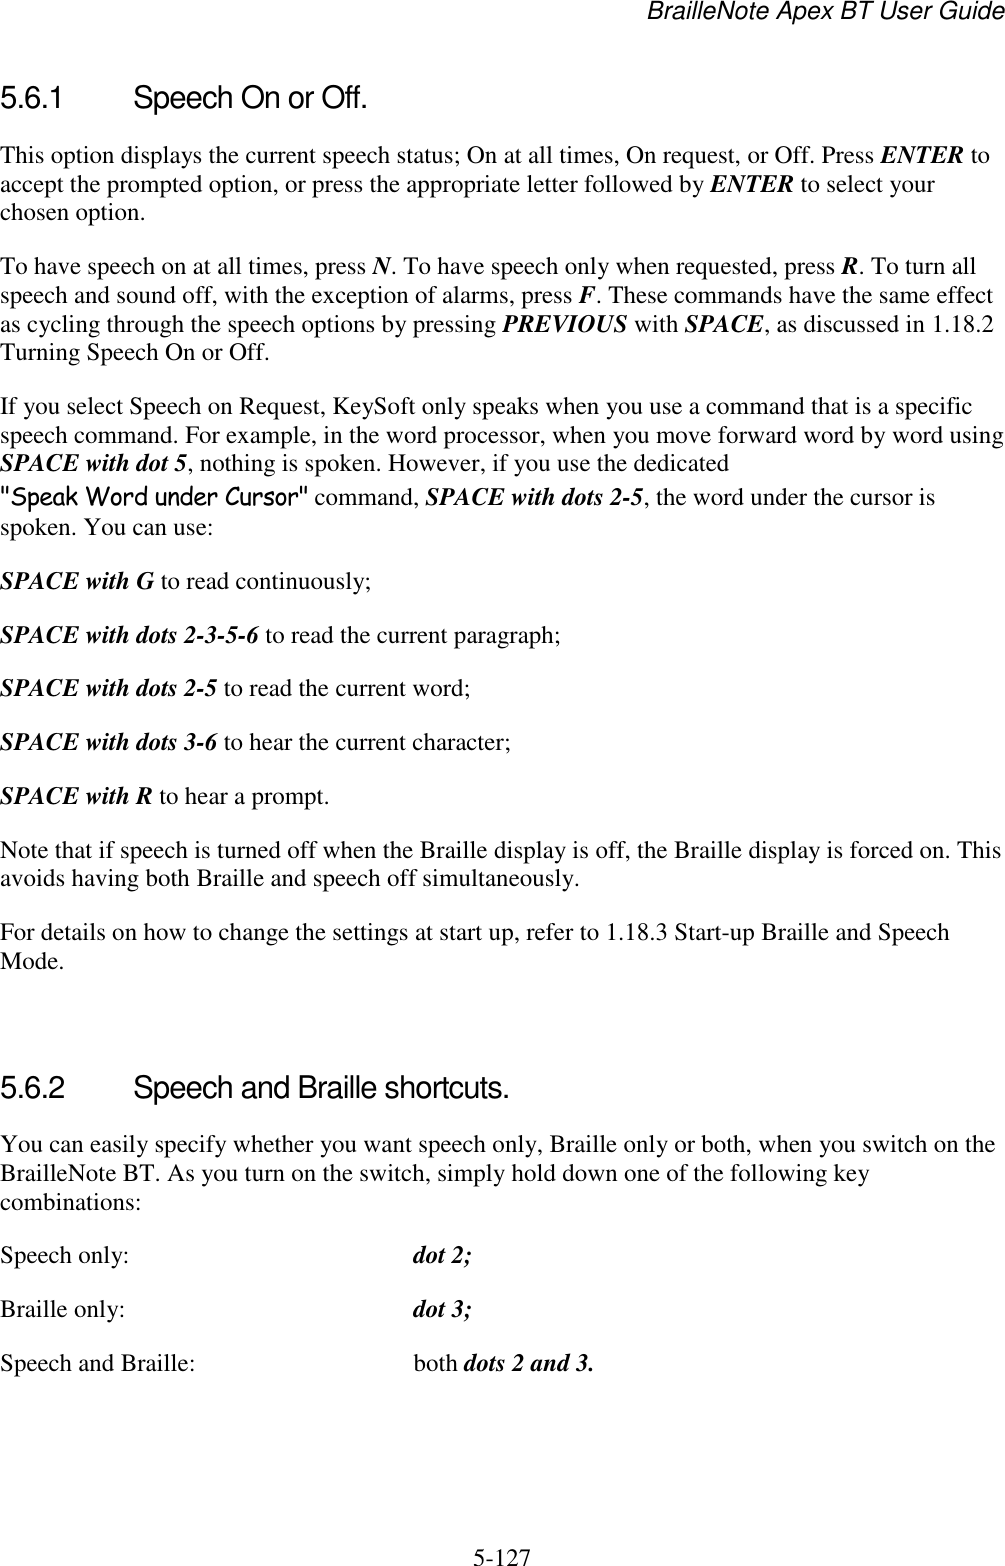 BrailleNote Apex BT User Guide   5-127   5.6.1  Speech On or Off. This option displays the current speech status; On at all times, On request, or Off. Press ENTER to accept the prompted option, or press the appropriate letter followed by ENTER to select your chosen option. To have speech on at all times, press N. To have speech only when requested, press R. To turn all speech and sound off, with the exception of alarms, press F. These commands have the same effect as cycling through the speech options by pressing PREVIOUS with SPACE, as discussed in 1.18.2 Turning Speech On or Off. If you select Speech on Request, KeySoft only speaks when you use a command that is a specific speech command. For example, in the word processor, when you move forward word by word using SPACE with dot 5, nothing is spoken. However, if you use the dedicated &quot;Speak Word under Cursor&quot; command, SPACE with dots 2-5, the word under the cursor is spoken. You can use: SPACE with G to read continuously; SPACE with dots 2-3-5-6 to read the current paragraph; SPACE with dots 2-5 to read the current word; SPACE with dots 3-6 to hear the current character; SPACE with R to hear a prompt. Note that if speech is turned off when the Braille display is off, the Braille display is forced on. This avoids having both Braille and speech off simultaneously. For details on how to change the settings at start up, refer to 1.18.3 Start-up Braille and Speech Mode.    5.6.2  Speech and Braille shortcuts. You can easily specify whether you want speech only, Braille only or both, when you switch on the BrailleNote BT. As you turn on the switch, simply hold down one of the following key combinations: Speech only:  dot 2; Braille only:  dot 3; Speech and Braille:  both dots 2 and 3.   